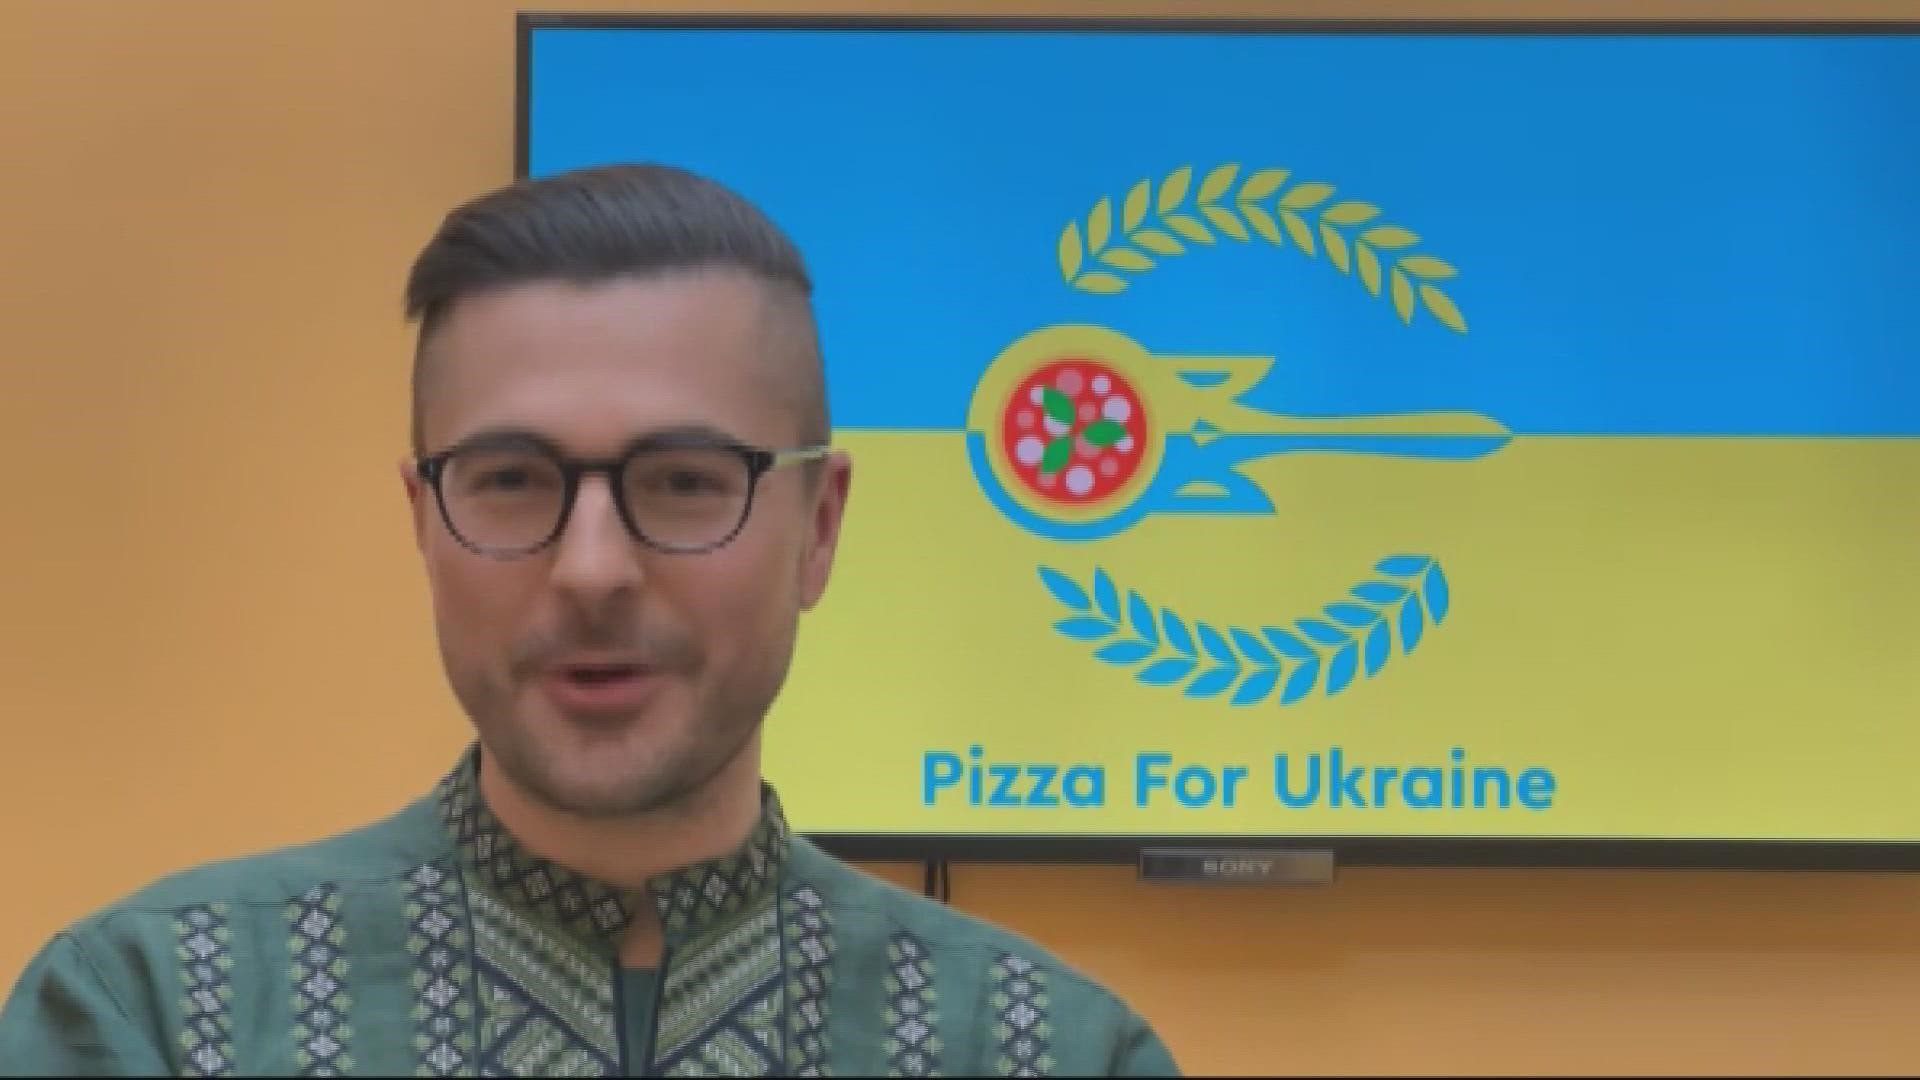 Pizza for Ukraine is feeding and serving Ukrainians displaced by war, while offering a slice of joy.